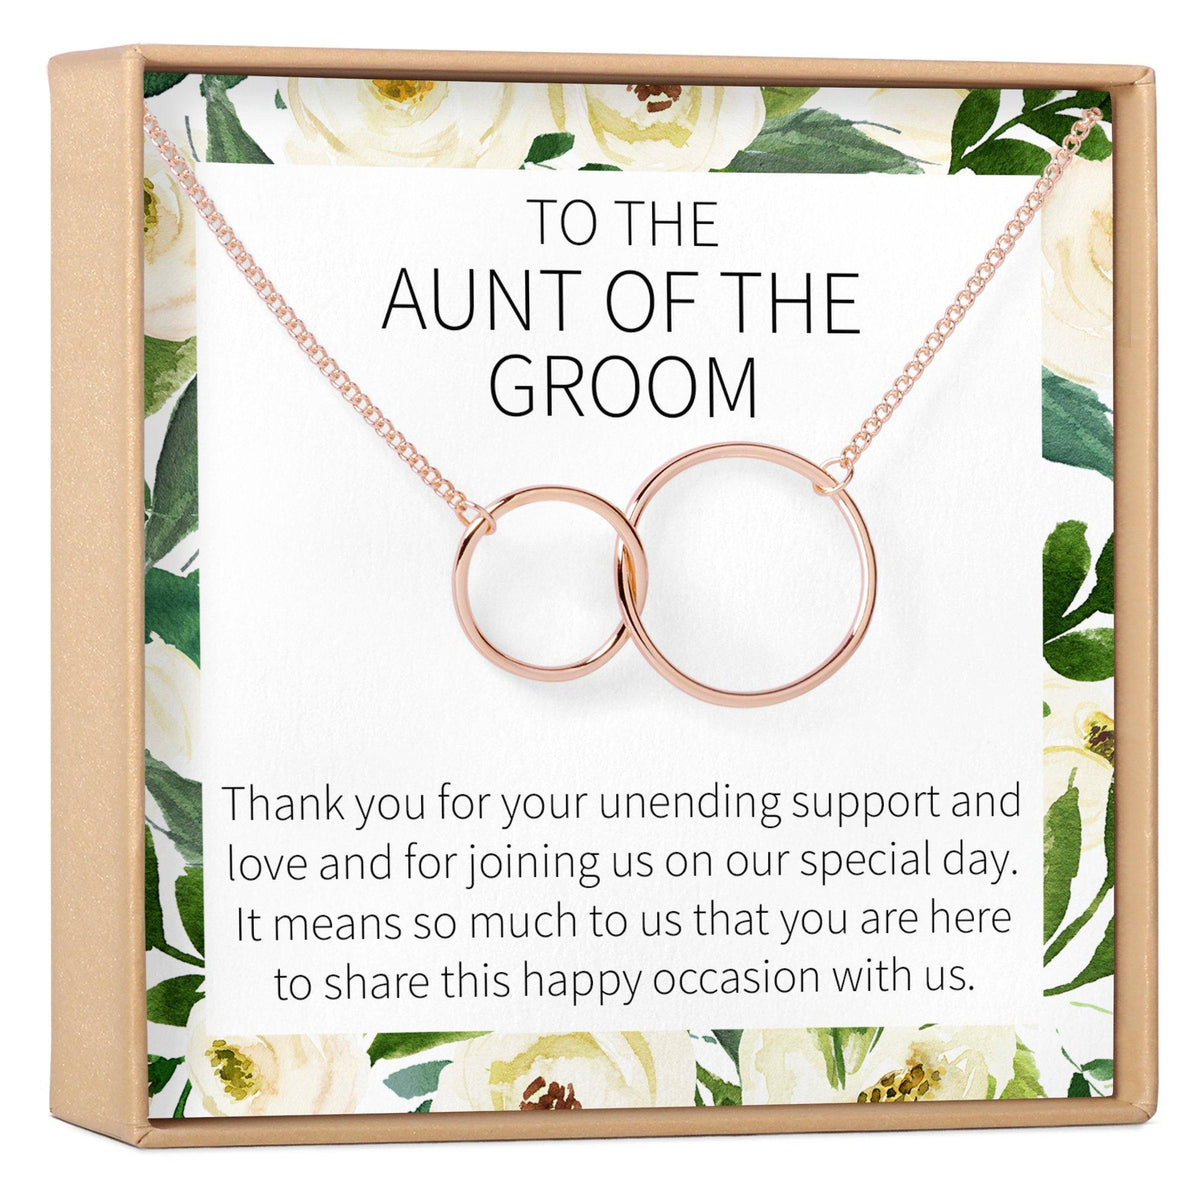 Aunt of the Groom Necklace - Dear Ava, Jewelry / Necklaces / Pendants